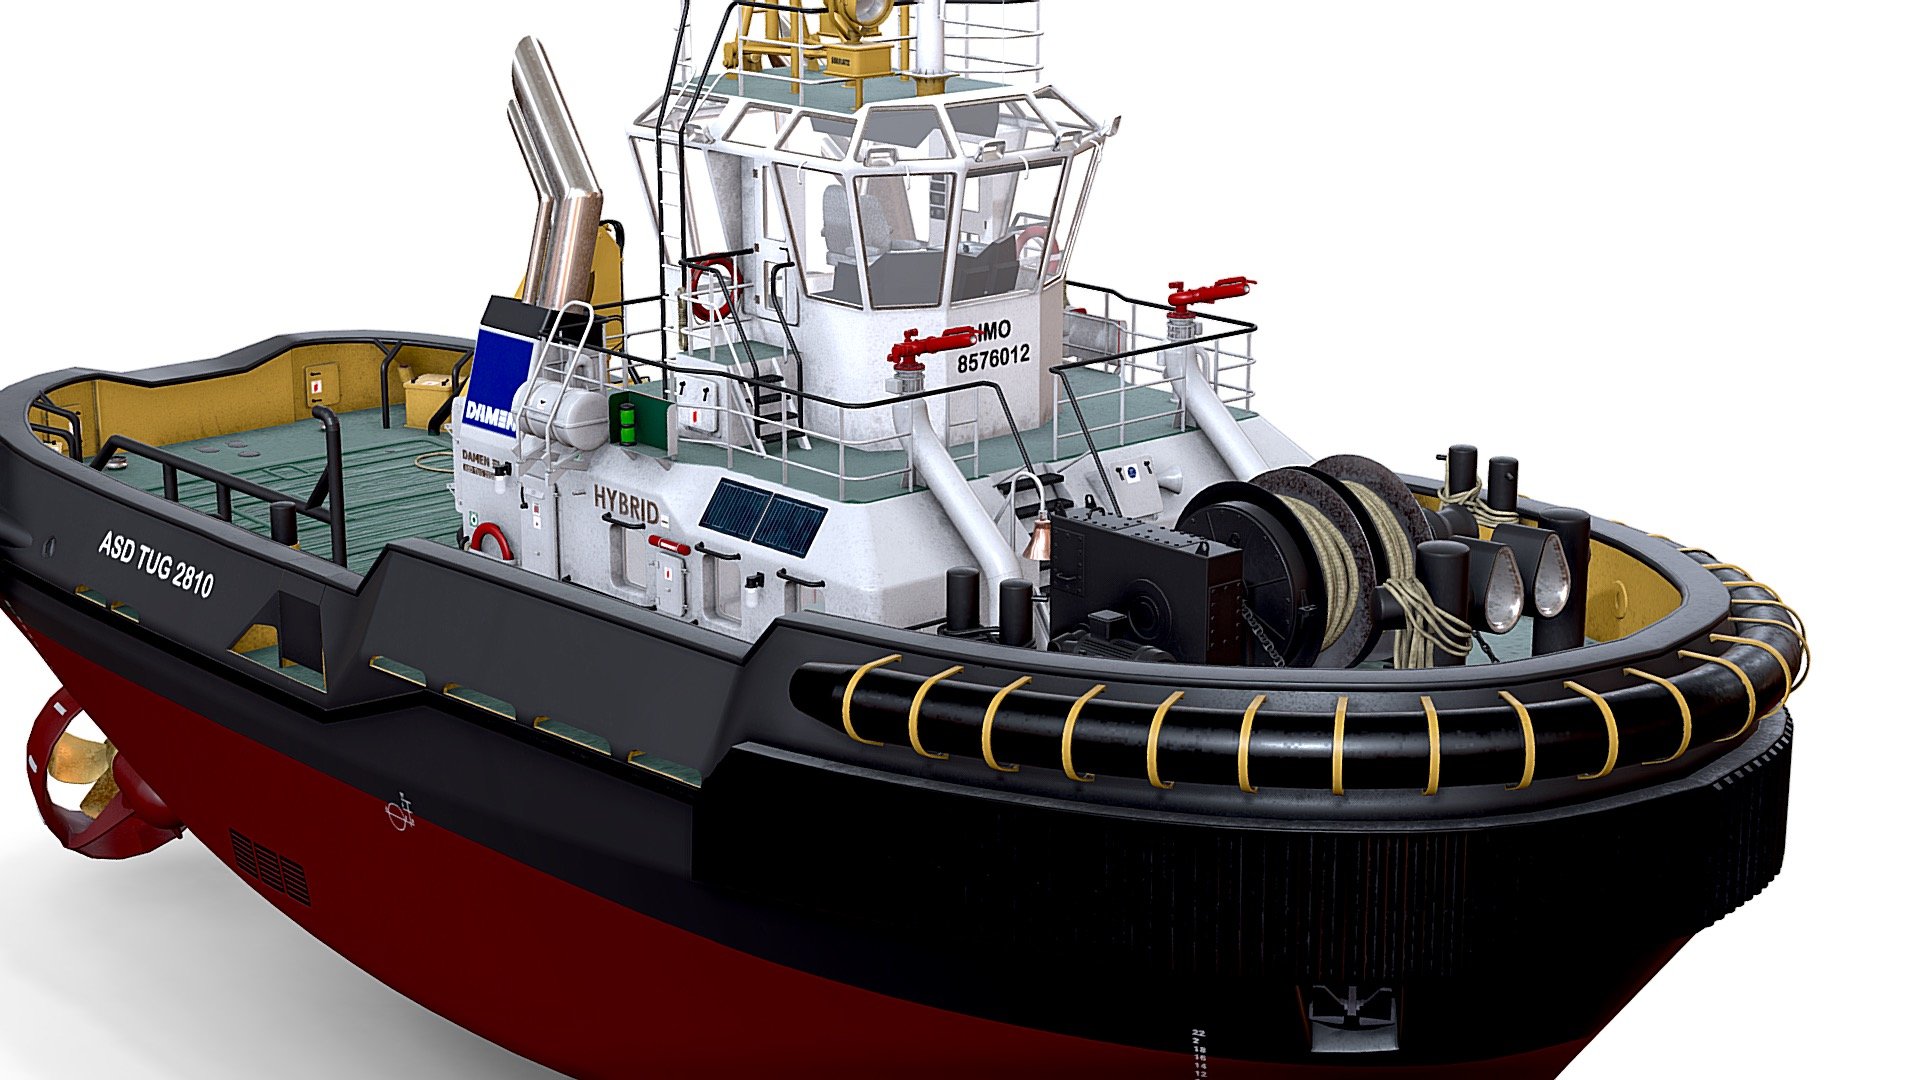 A beautiful 3D models prepared with care for details and hardware performance!
High resolution and fully detailed Harbour Tug . Modeled correctly scaled from original blueprints, enough detail for close-up renders.

Features: Original file format - 3dMax, Maya To all objects and materials in a scene names are appropriated; Real world size; Coordinates of the location of the model in space (x0, y0, z0); Files with the model does not contain extraneous or hidden objects (lights, cameras, etc.); Photo-realistic model; Model ready for animation.

ASD Tug 2810 HYBRID
Bollard pull max (tonnes) 60
Length (meter) 28.67
Power total (BKW) 3730
Speed max (kts) 13.4
Beam (m) - 10.43

If you have questions about my models or need any kind of help, feel free to contact me and i'll do my best to help you 3d model